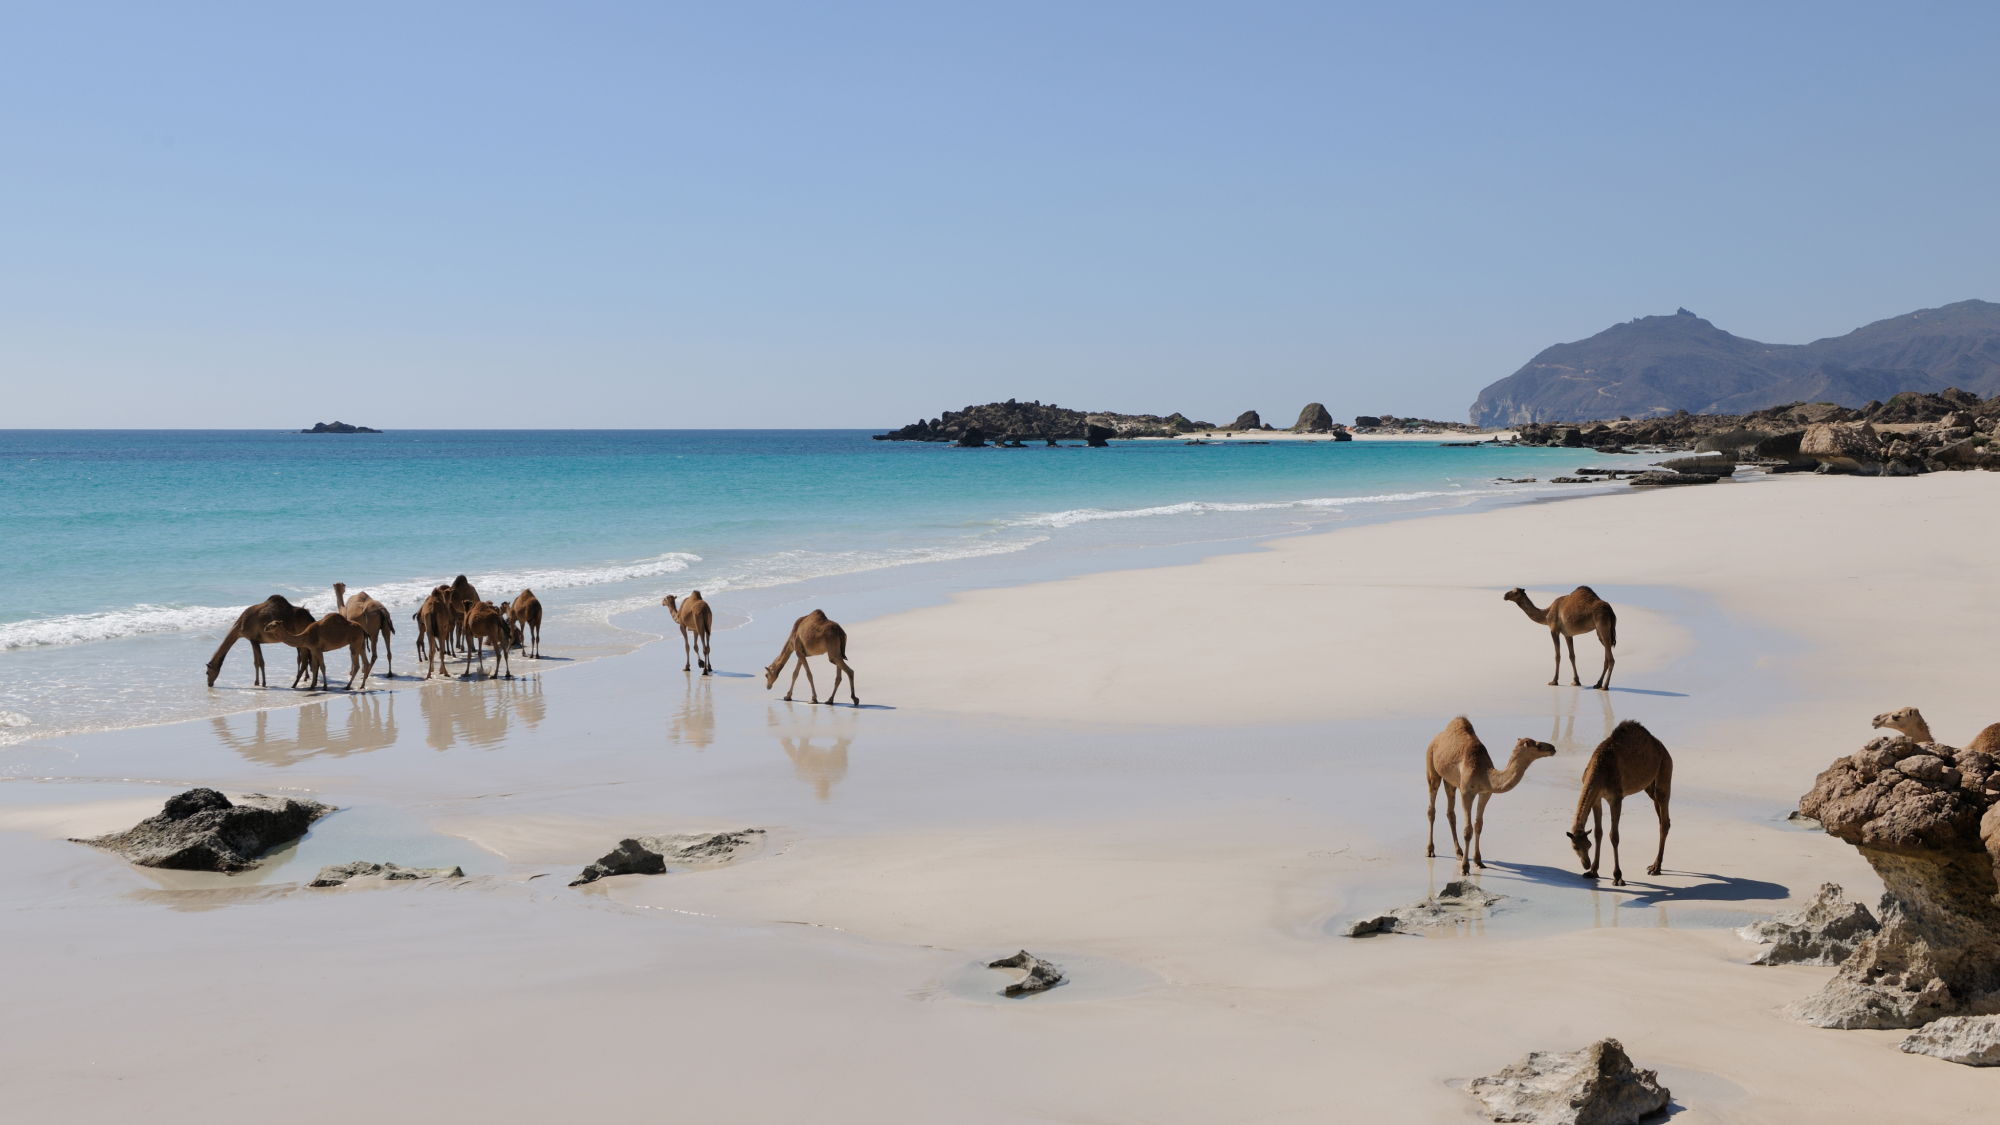 pack of camels at the beach shore